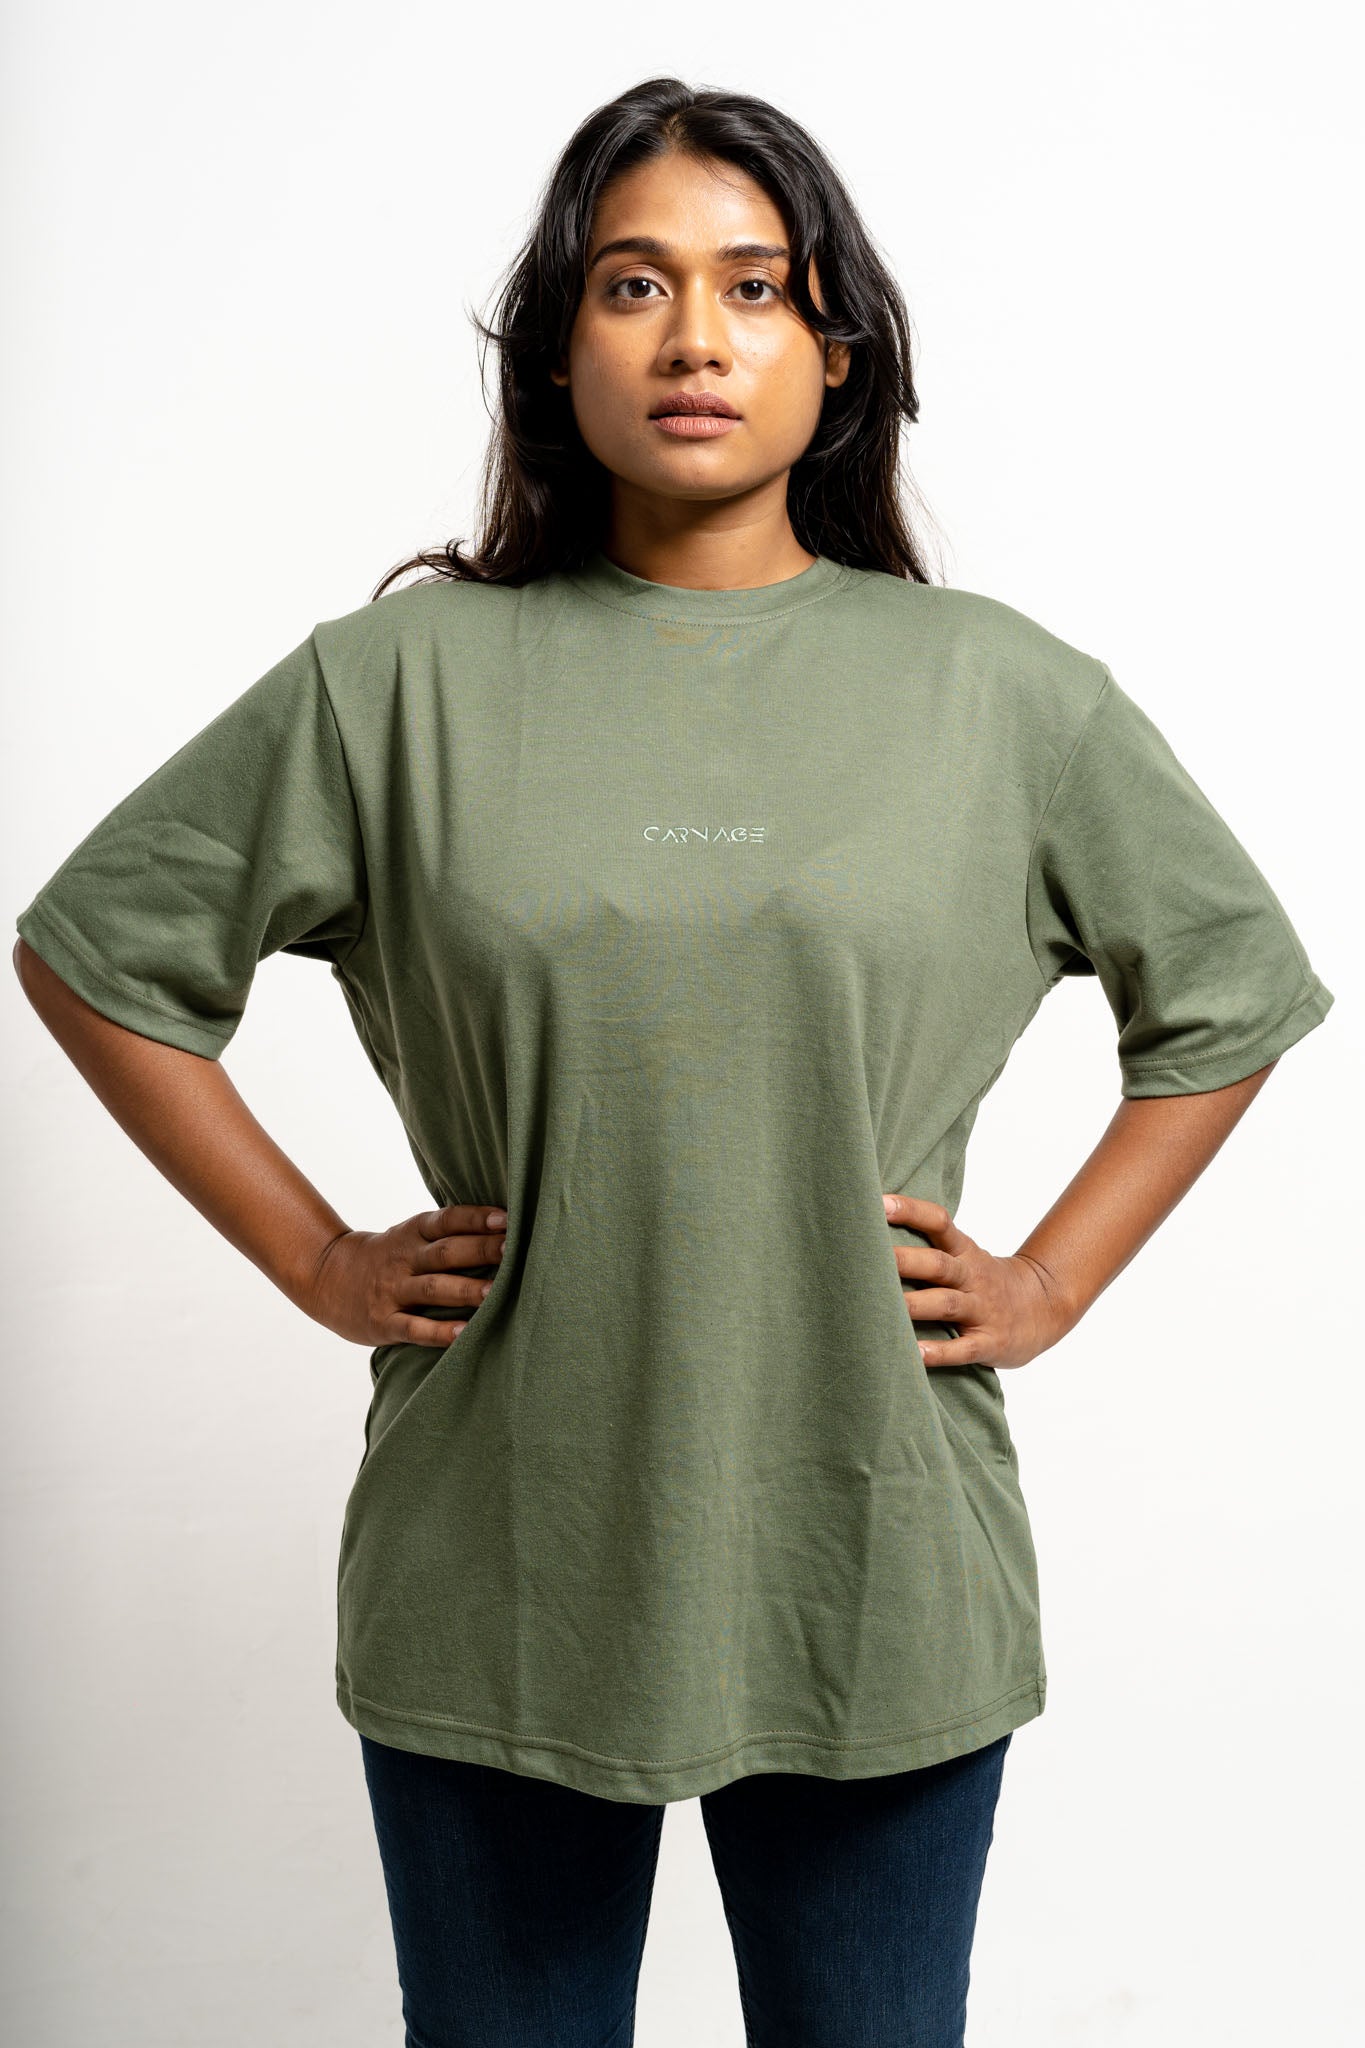 Carnage Desire Oversize Tee 2.0 - Forest Green - Unisex